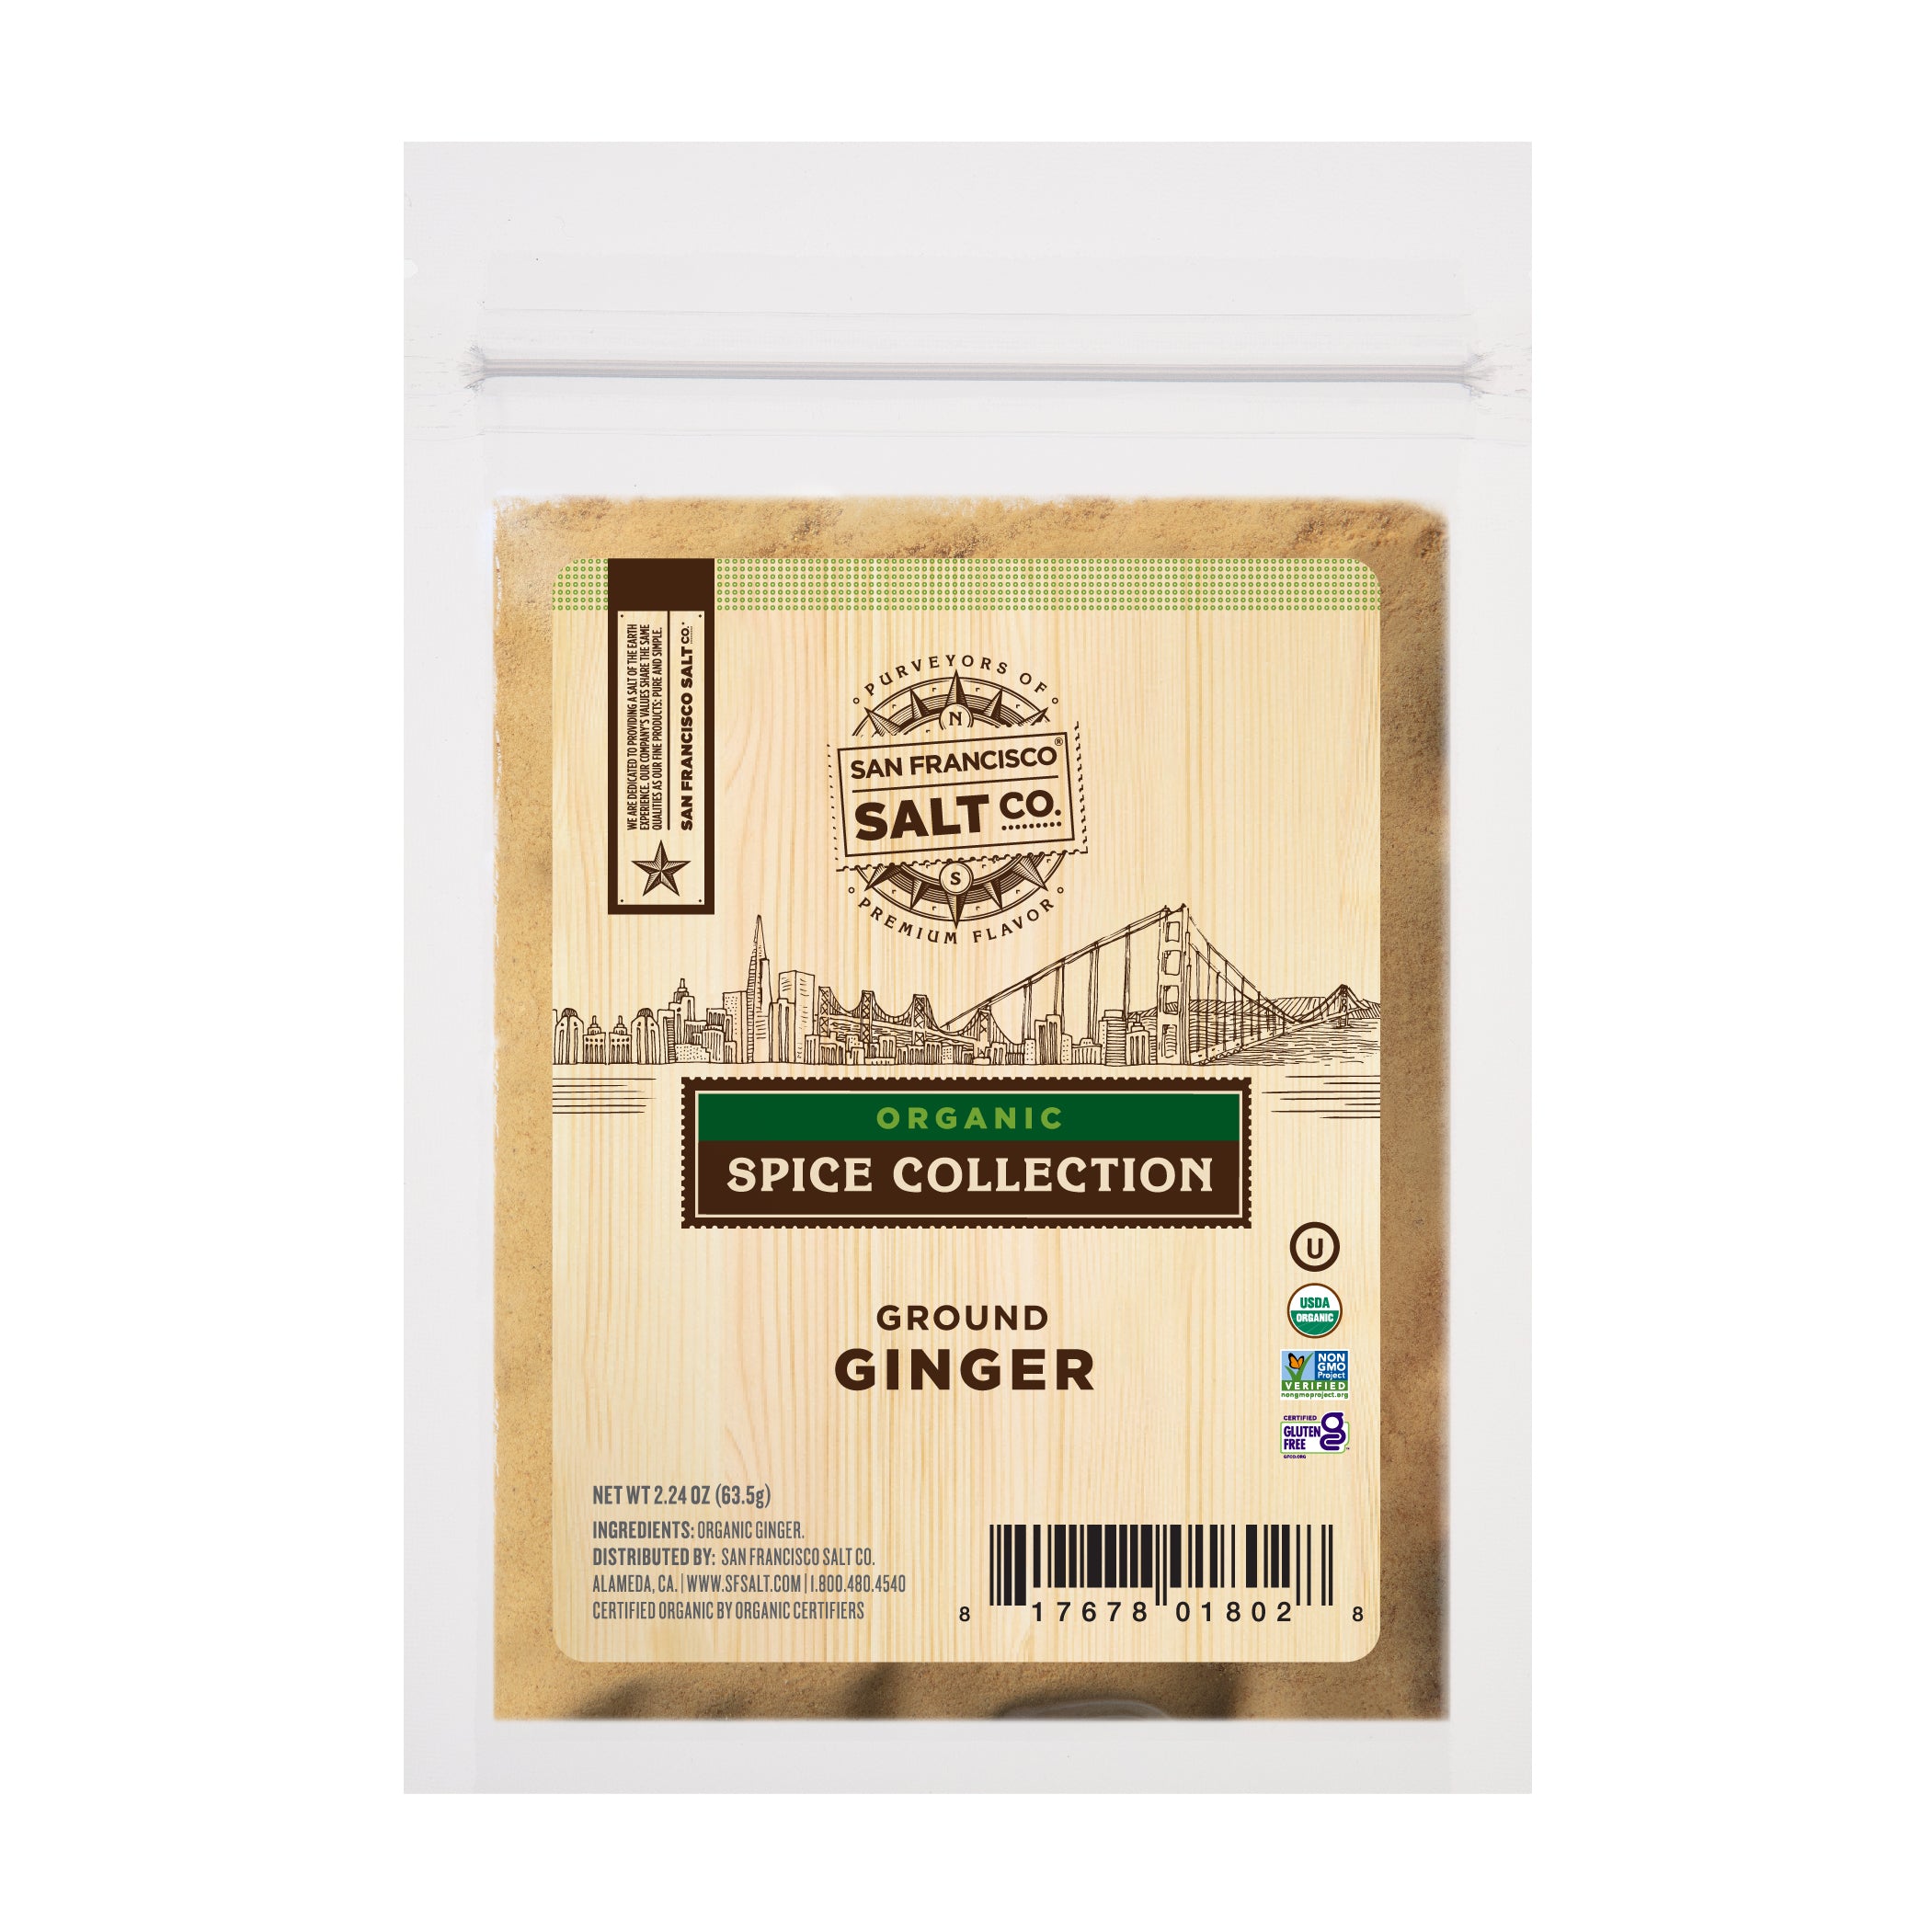 Organic Ground Ginger 2.24 oz Pouch - Organic Spice Collection by San Francisco Salt Company